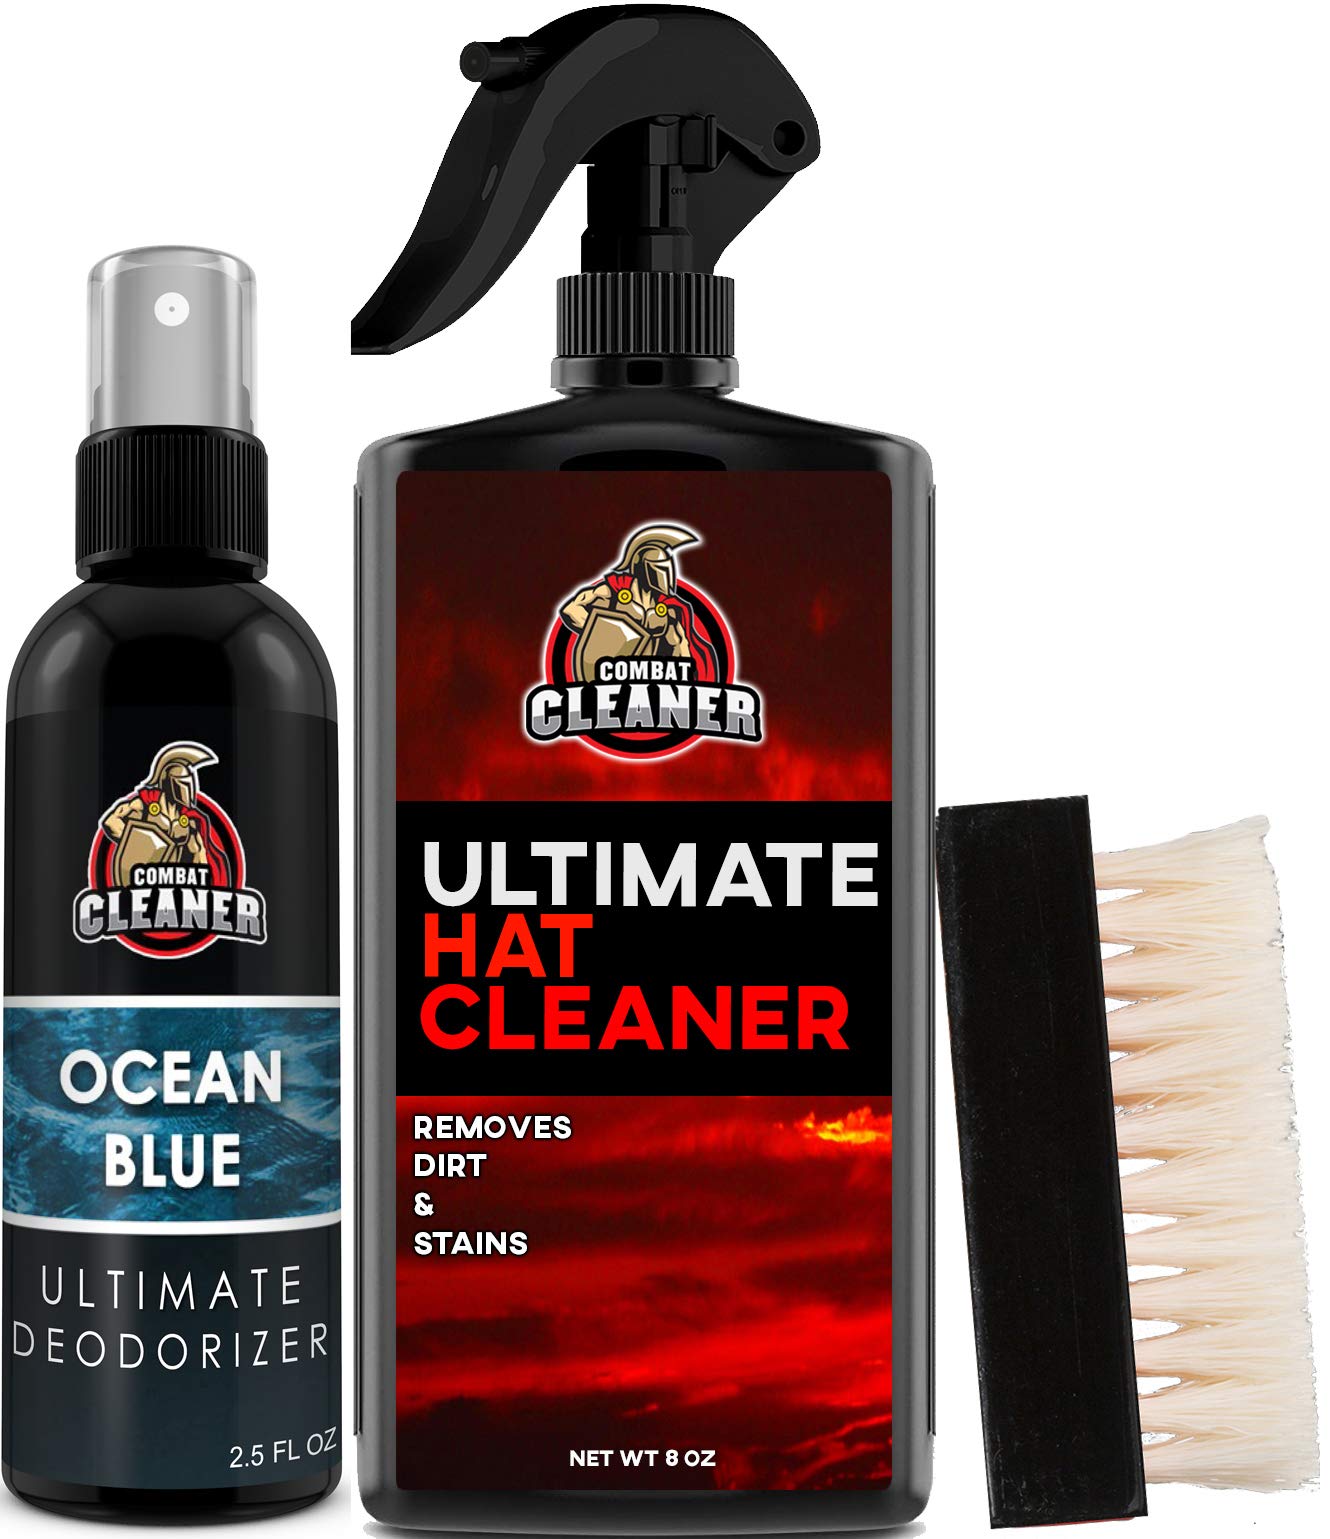 Combat Cleaner Ultimate Hat Cleaner Kit Used for All Types of Hats (Hat Cleaner Kit + Deodorizer) - Caps Fitted Caps Fitted Combat Cleaner